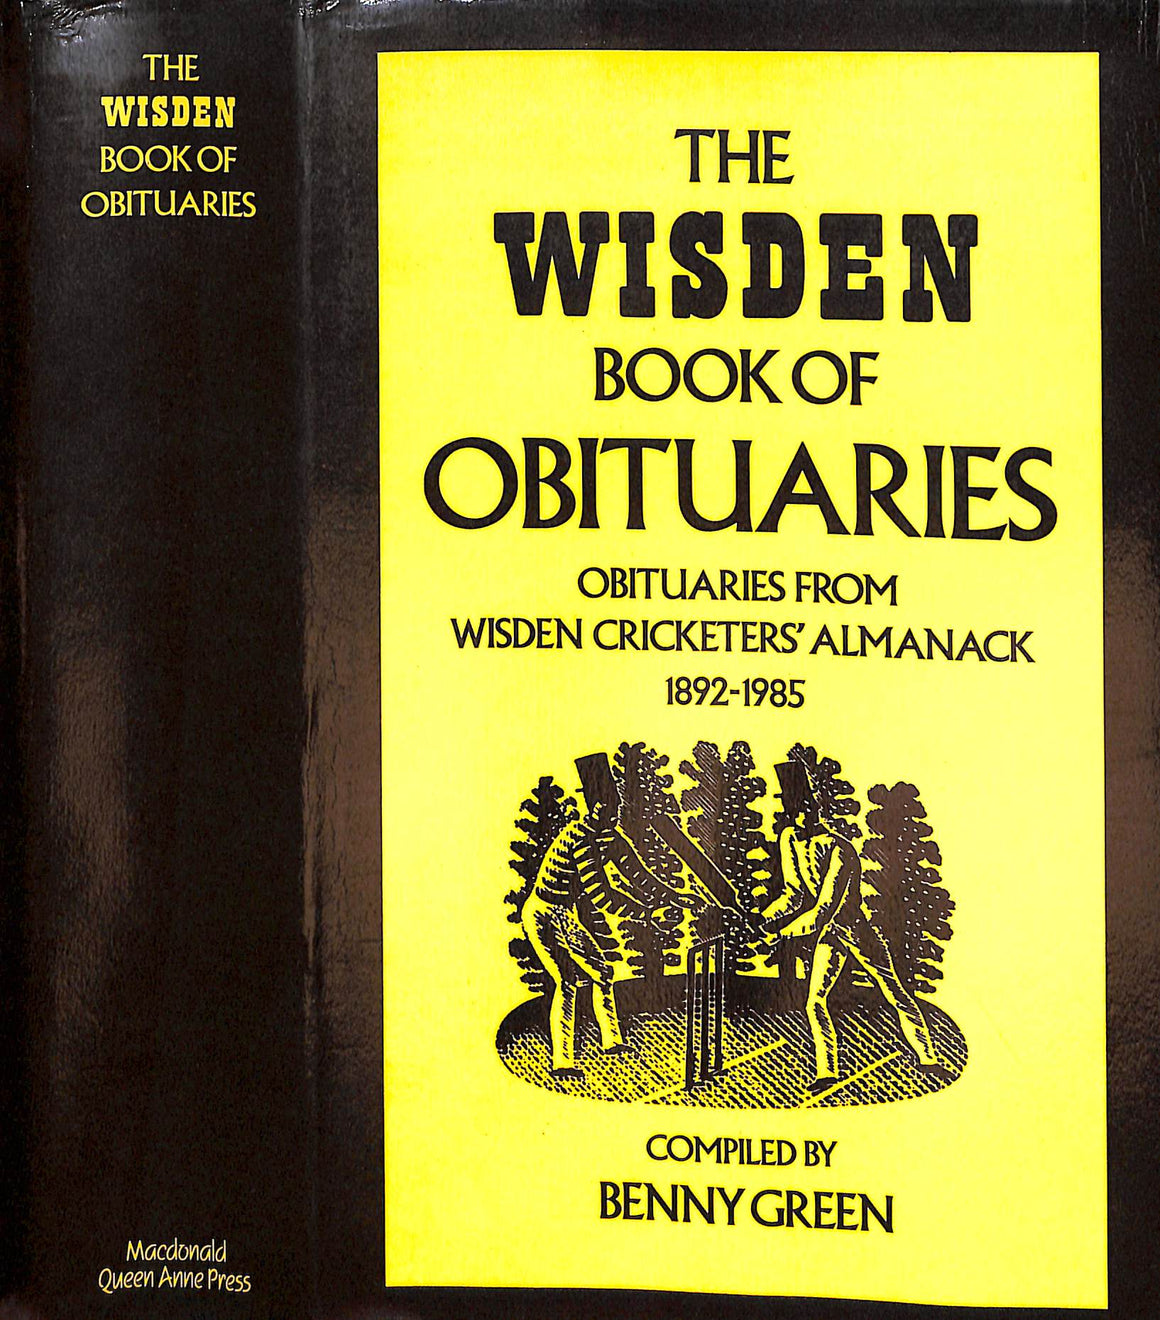 "The Wisden Book Of Obituaries: Obituaries From Wisden Cricketers' Almanack 1892-1985" 1986 GREEN, Benny [compiled by]